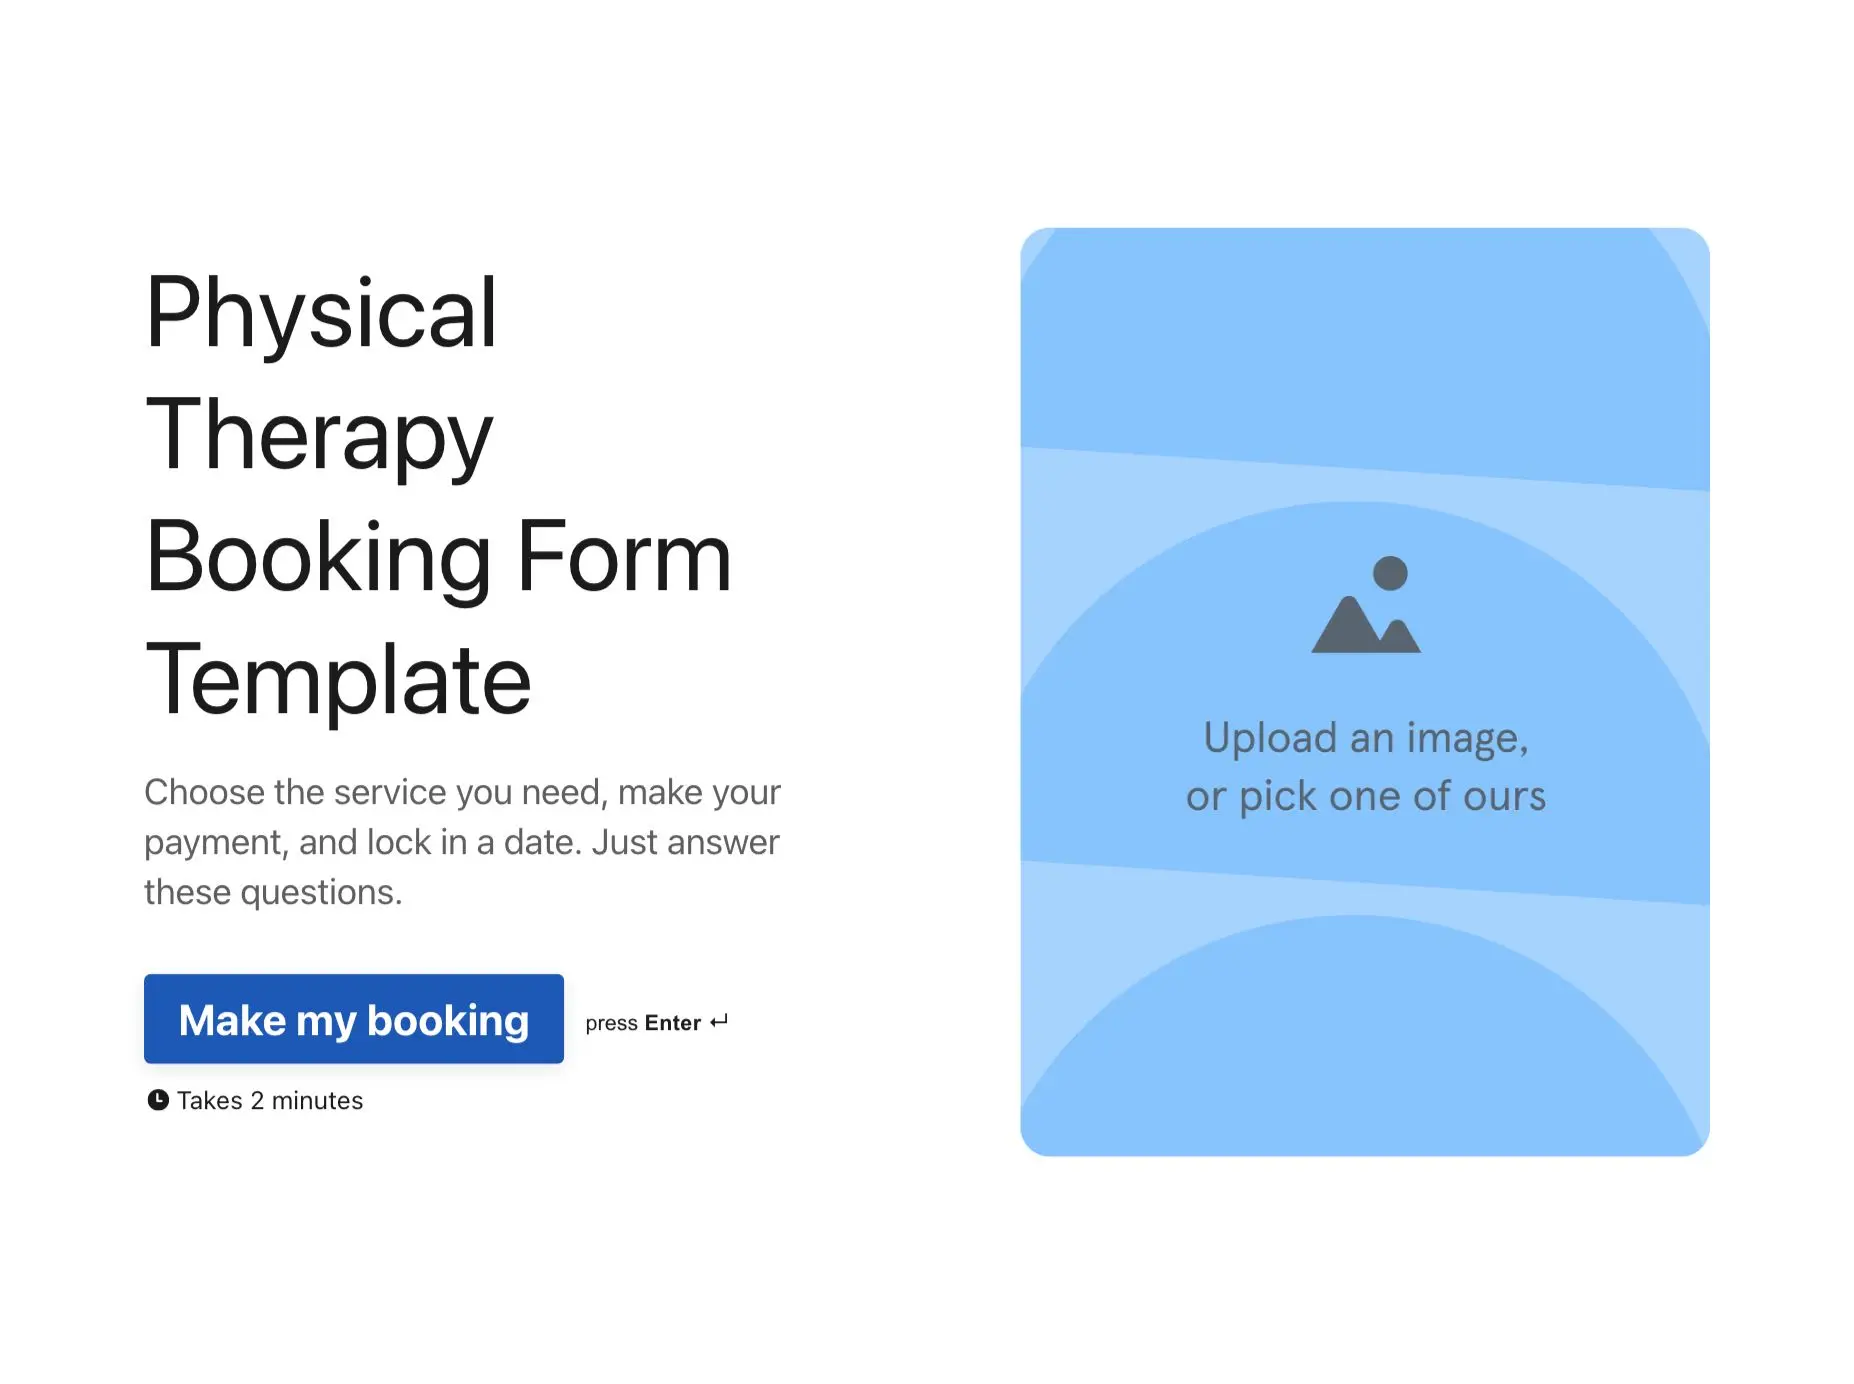 Physical Therapy Booking Form Template Hero